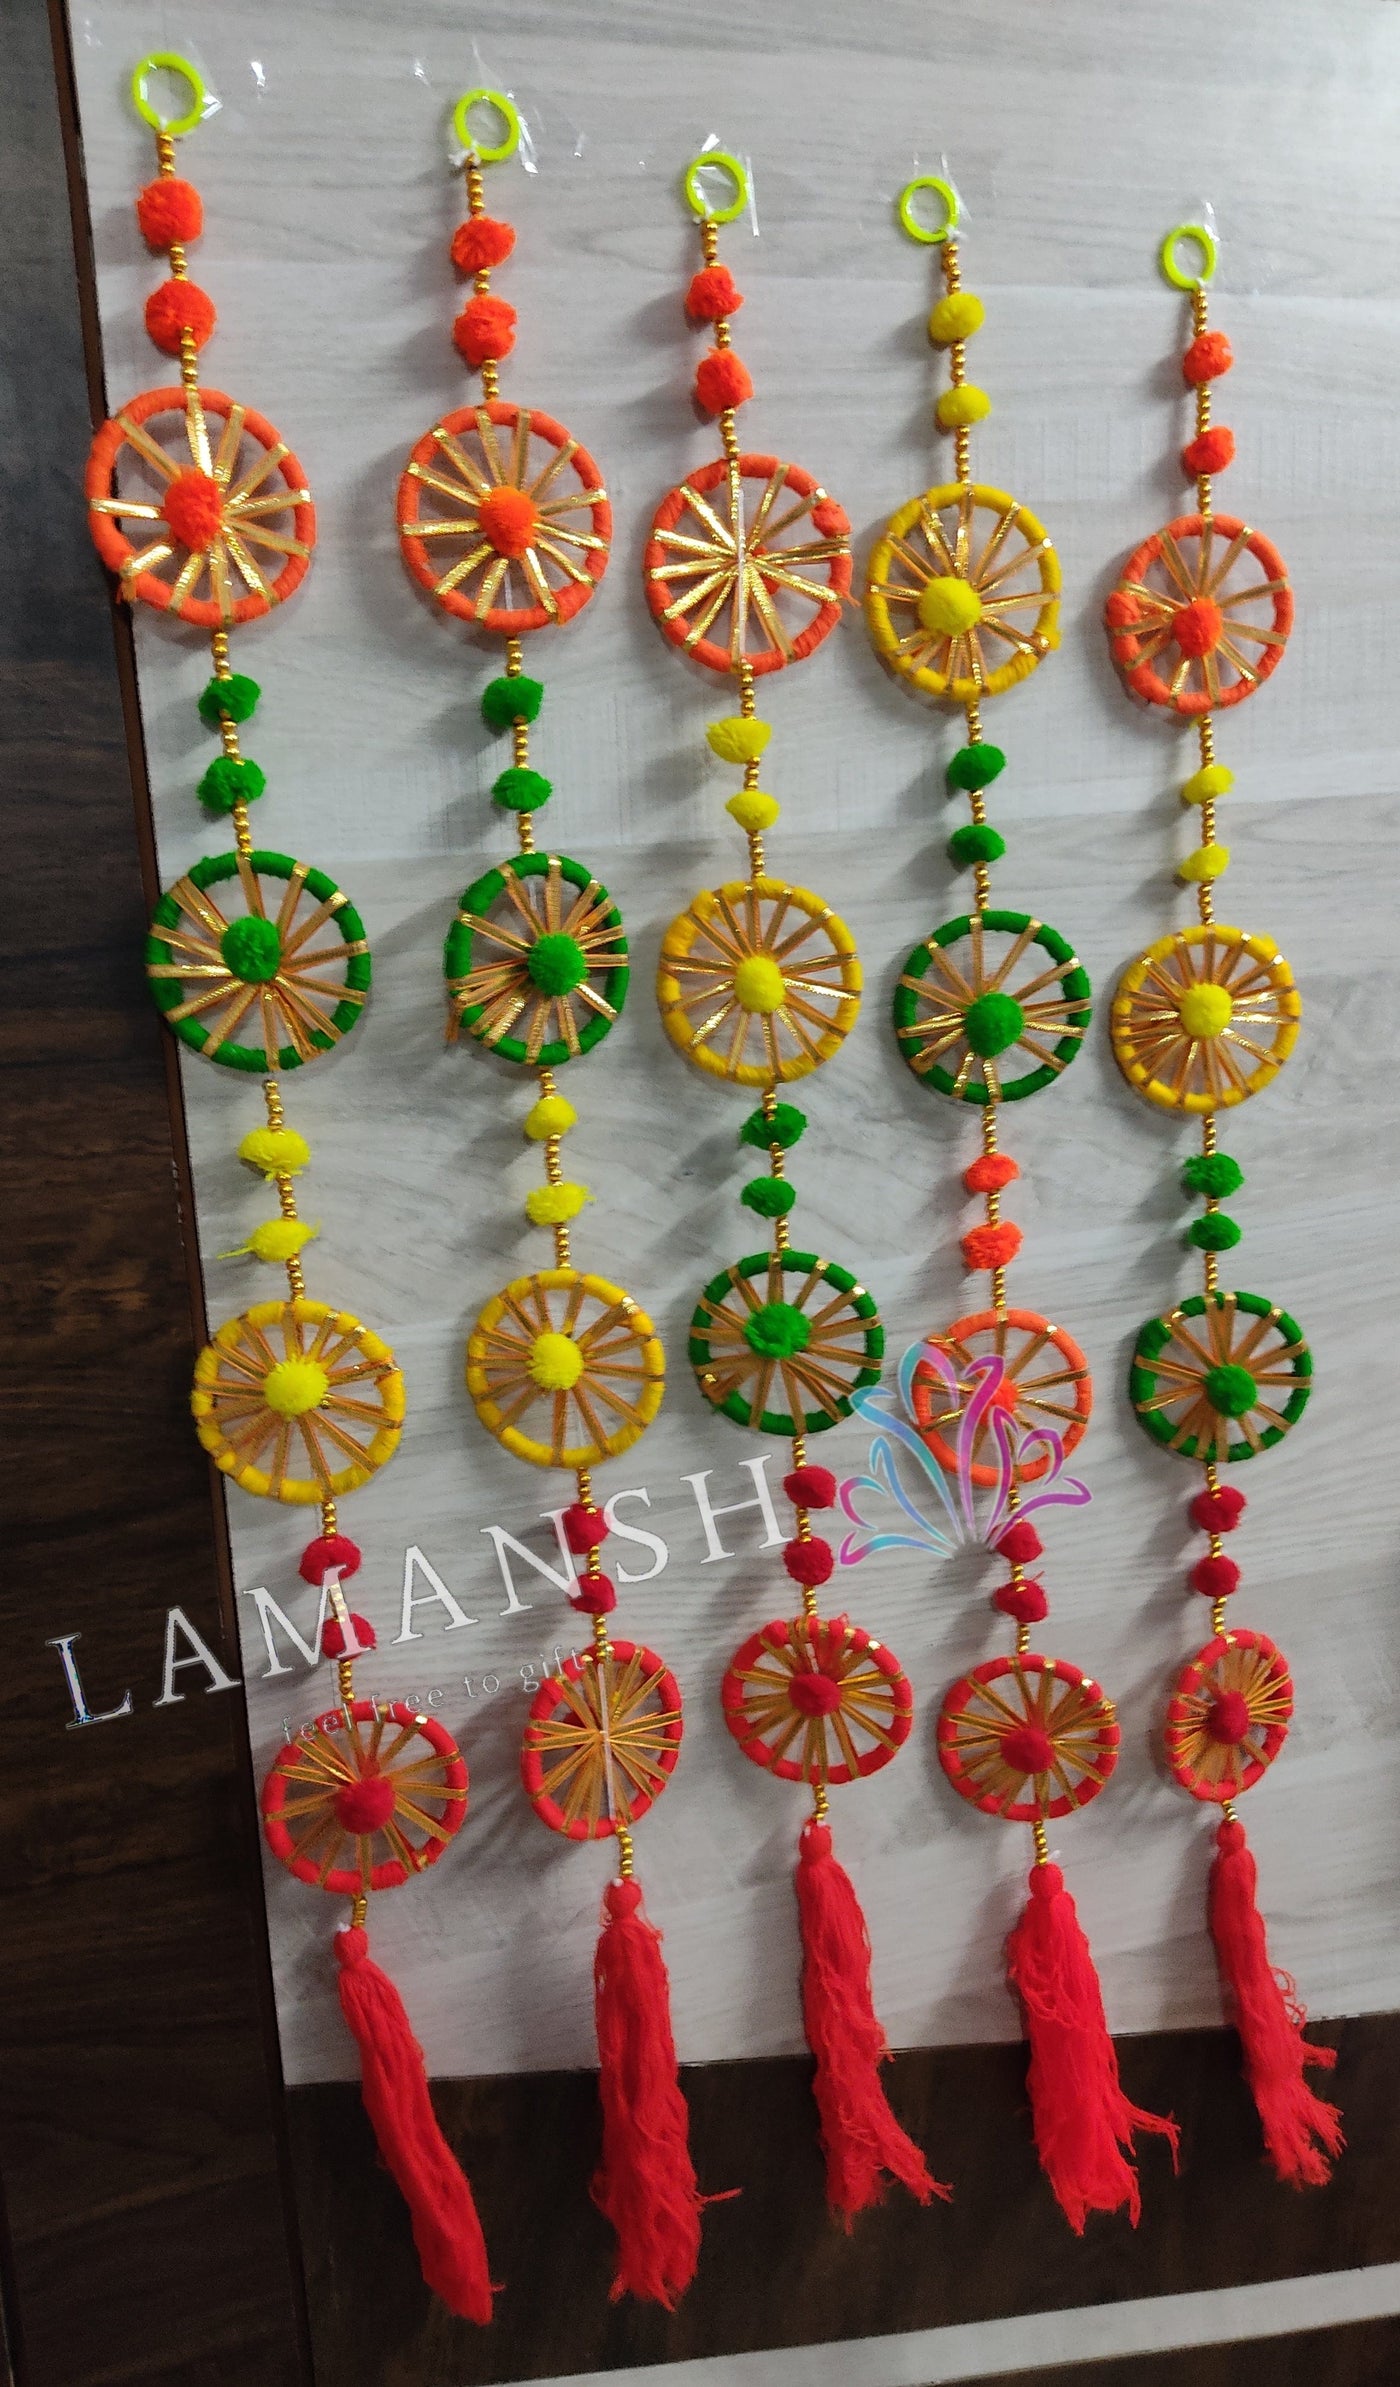 Lamansh gotta hangings Assorted colors / Gota , Woolen Tassels & other craft materials / 10 LAMANSH® 3 ft each Pack of 10 Decorative Round Gota Ring Chakri hangings with Tassels & Pom Poms for indian wedding decoration & backdrops / ethnic event decoration products for Diwali